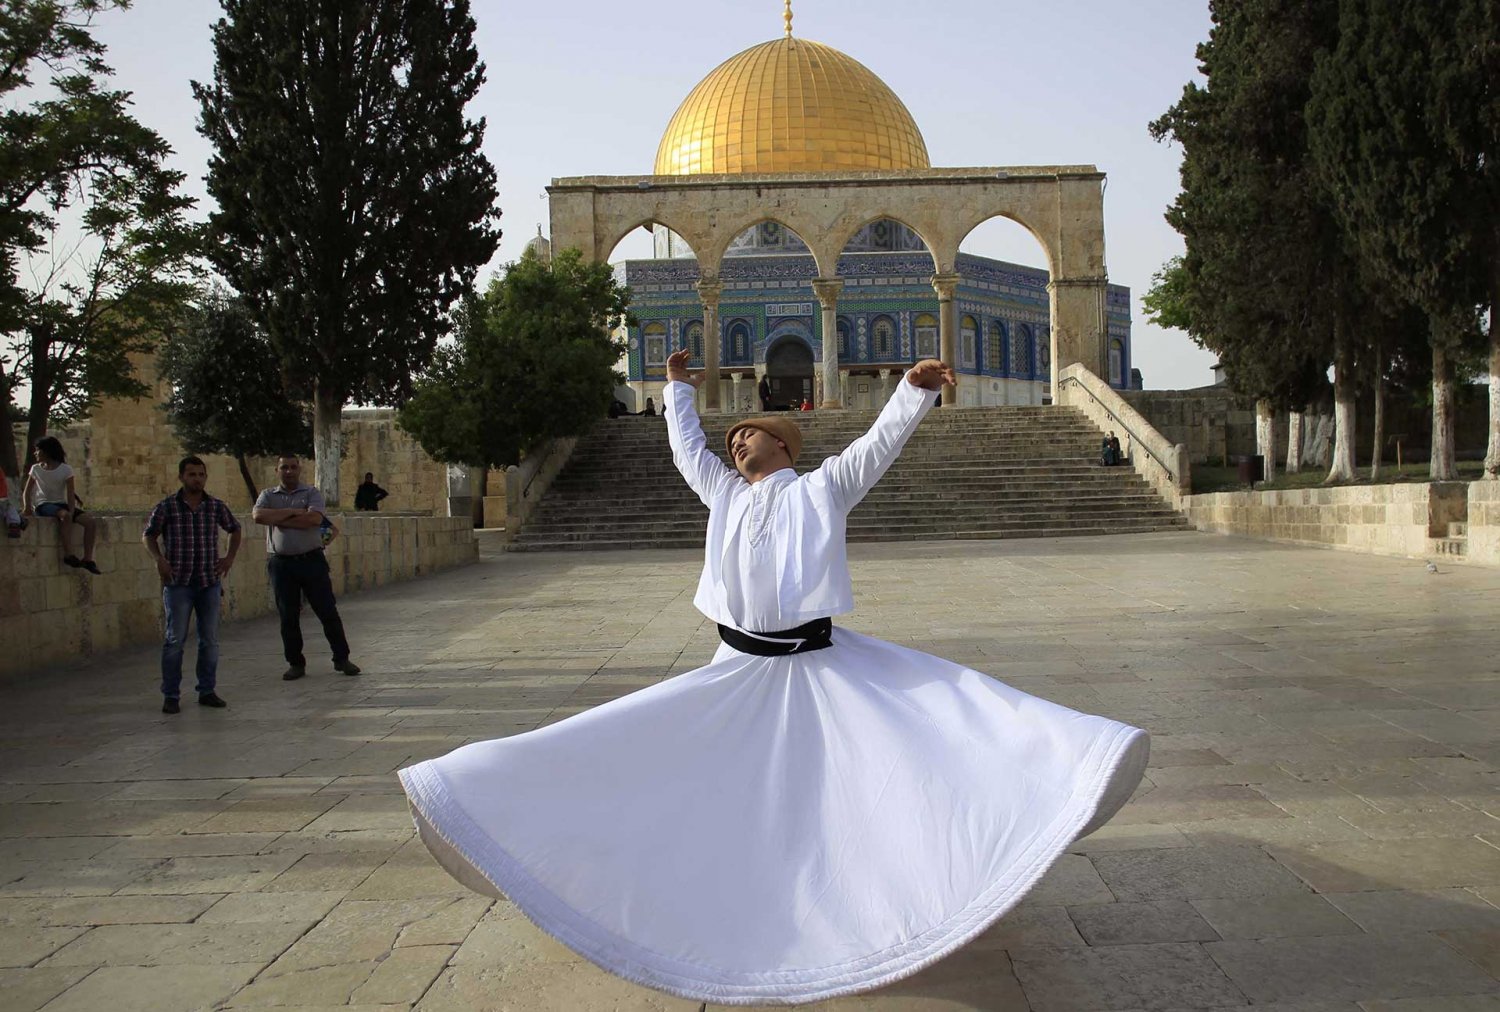 A whirling dervish performs at the Dome of the Rock in Jerusalem during the Nabi Musa festival, April 2016.